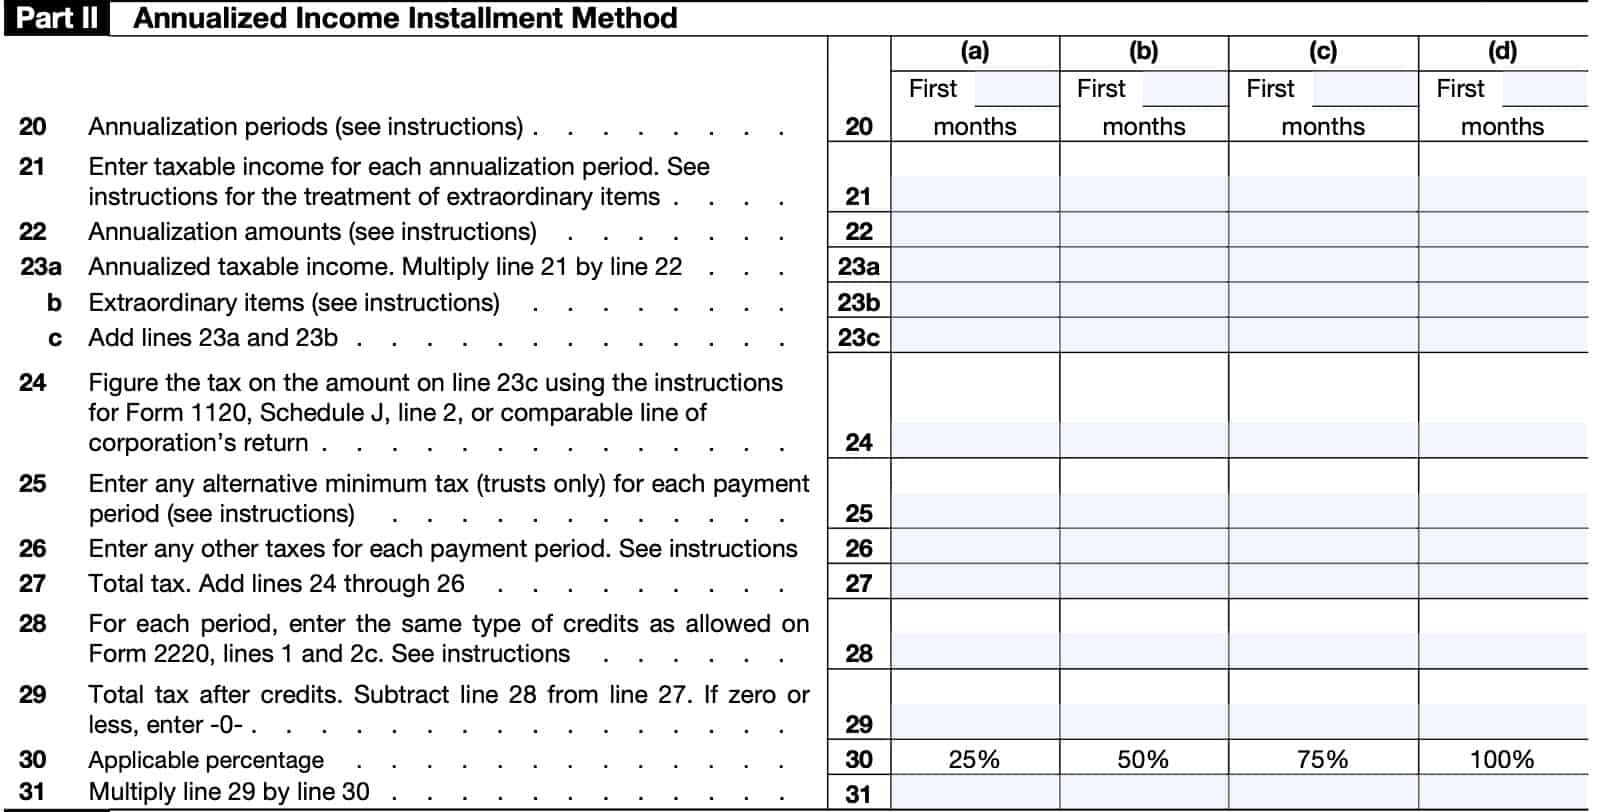 Schedule A, Part II: Annualized Income Installment Method